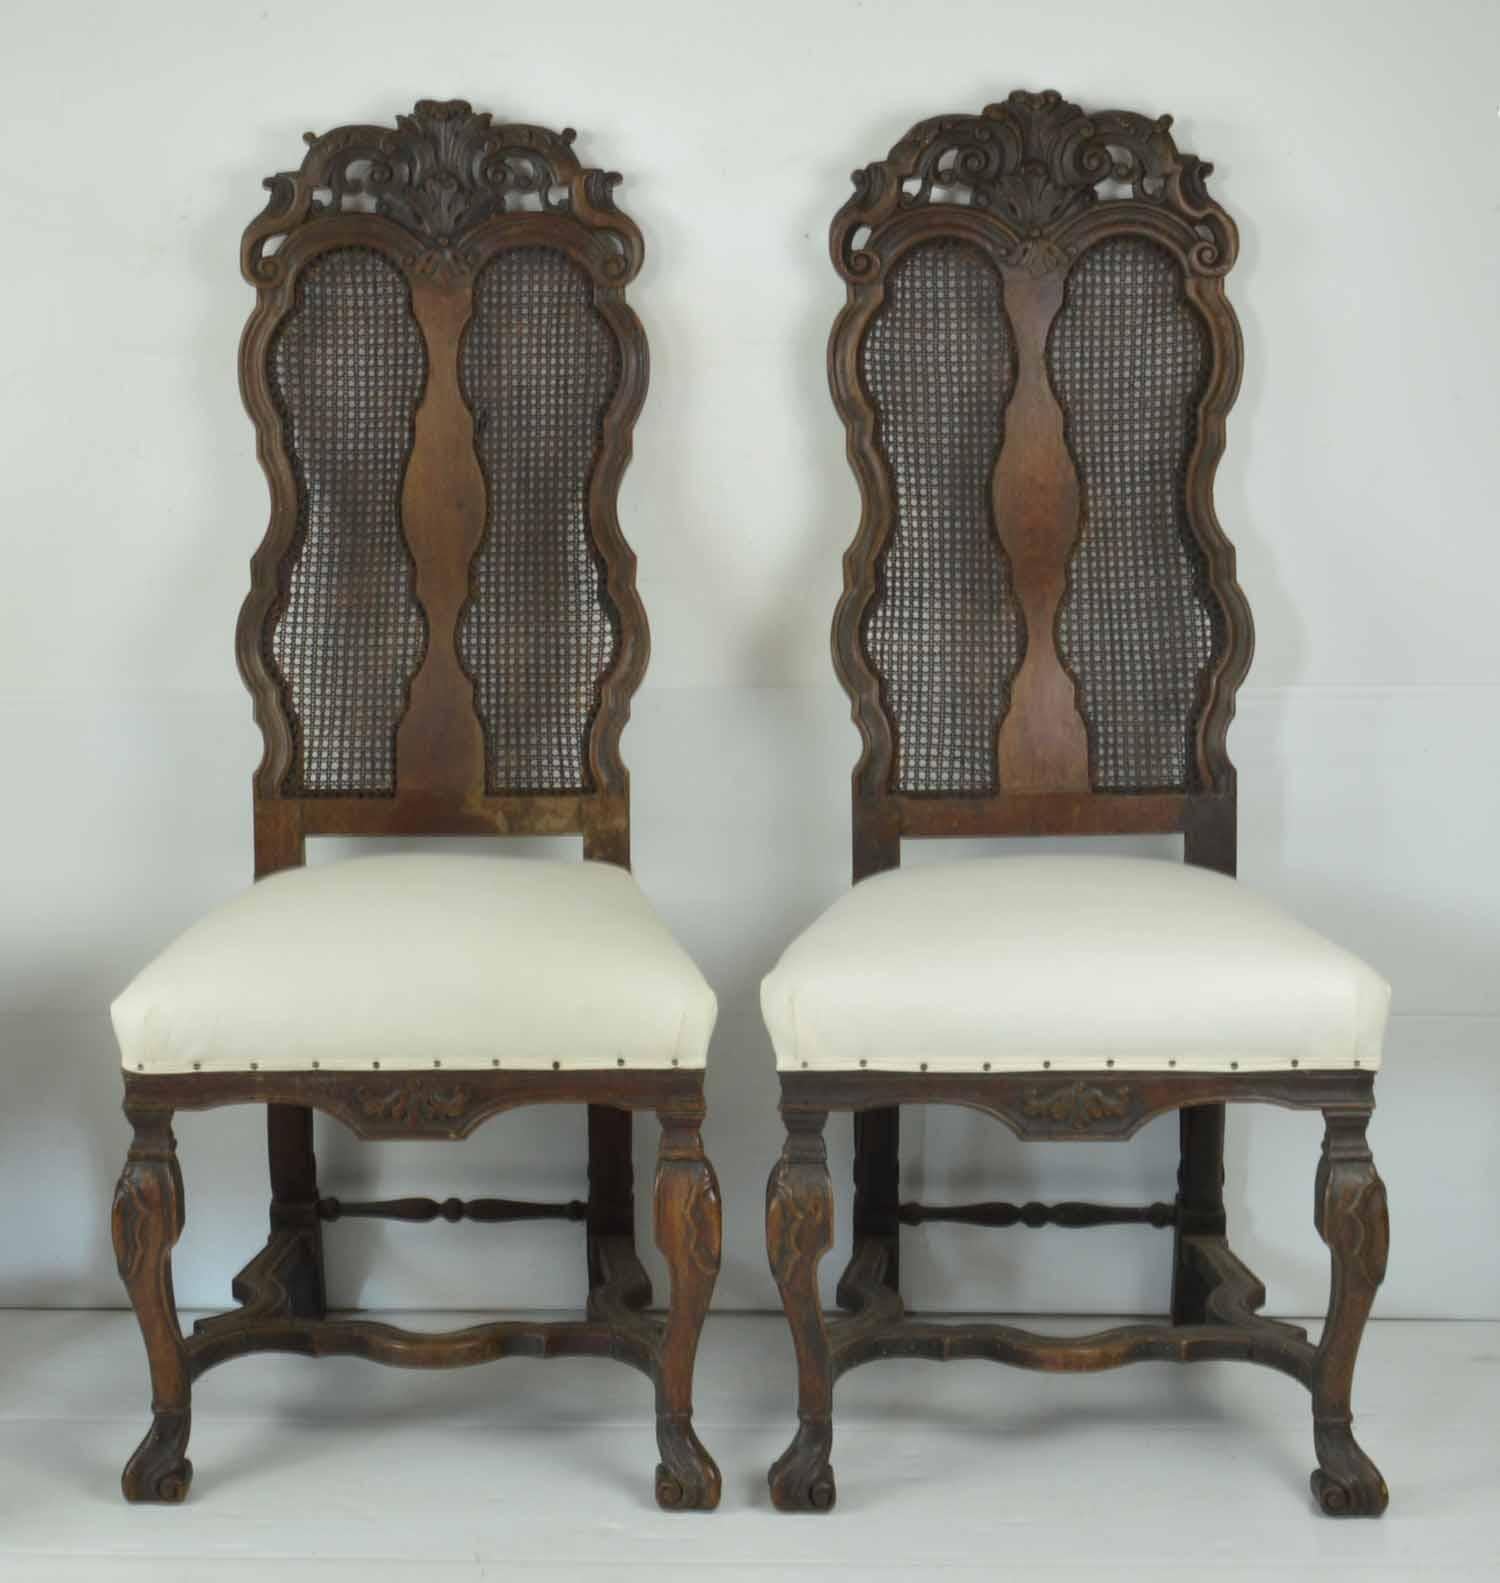 Sensational set of 4 carved walnut chairs.

Beautifully carved.

Newly upholstered in calico.

Lovely old patch repair to one of the backs of the top rail.

One of the side stretchers has been replaced.

There is some damage to a small